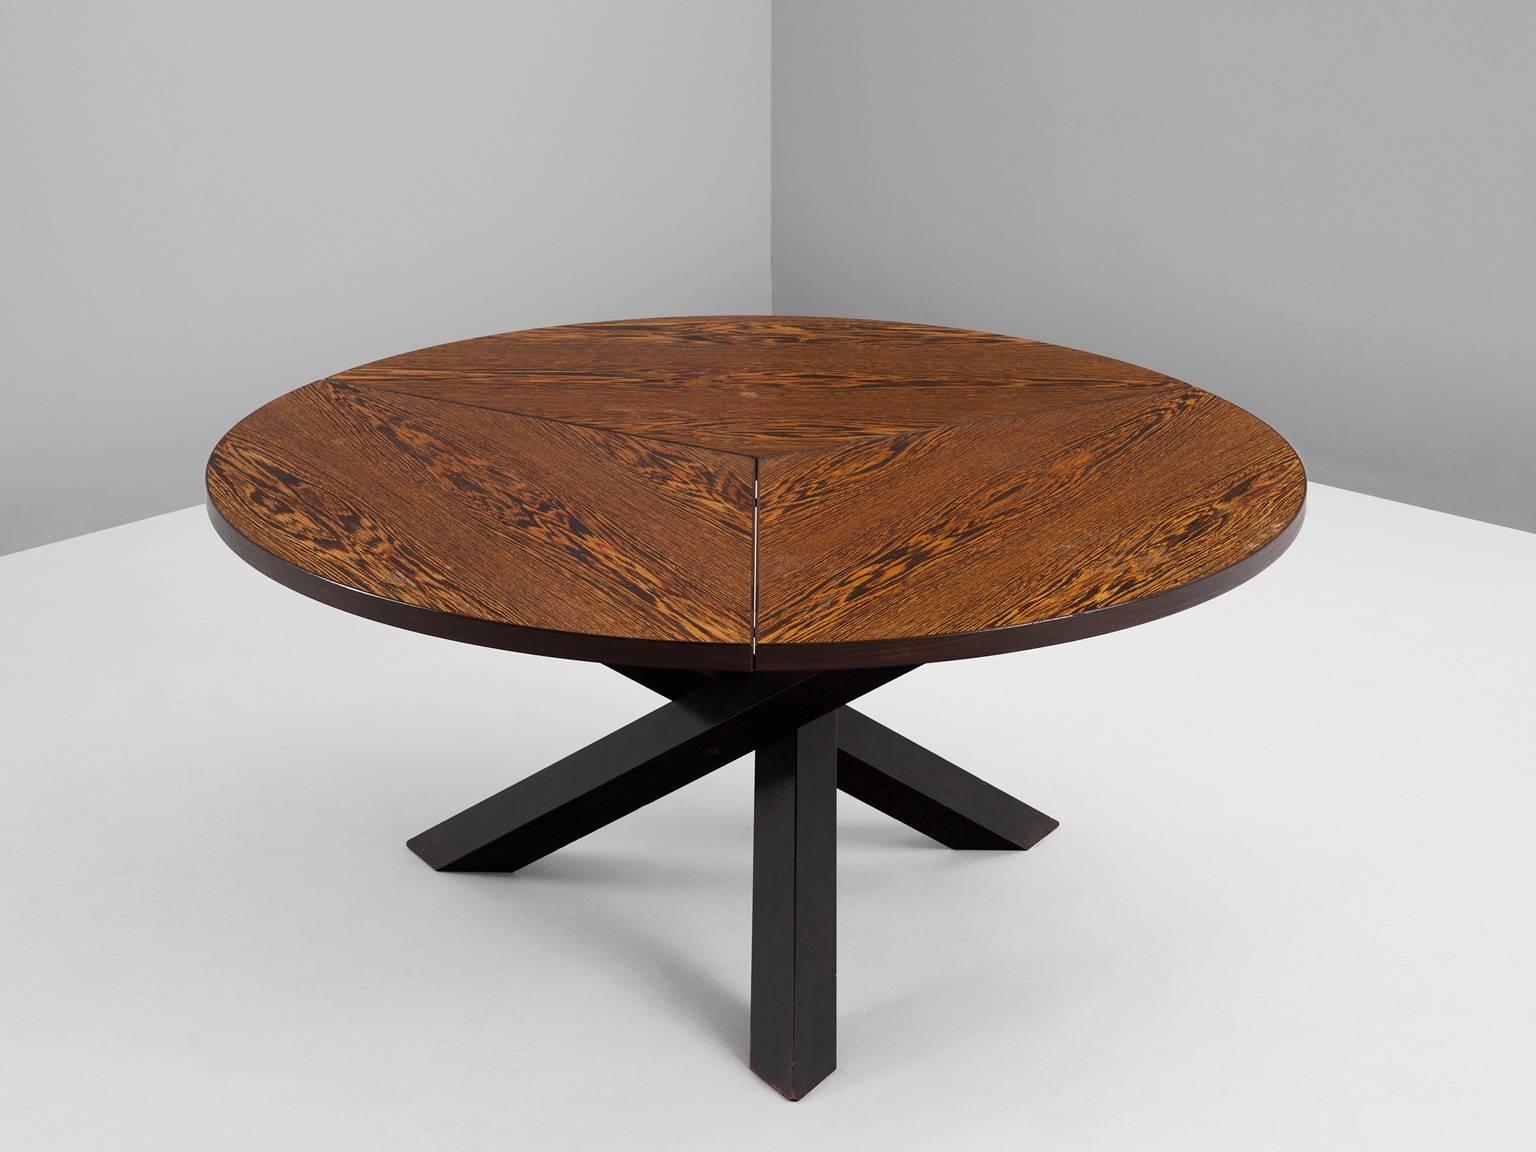 Dining table, in Wengé, by Martin Visser for 't Spectrum, the Netherlands, 1960s. 

Beautiful patinated dining table with round top, divided into three parts. The base consist of three crossed legs of solid, dark stained wood. The veneer top